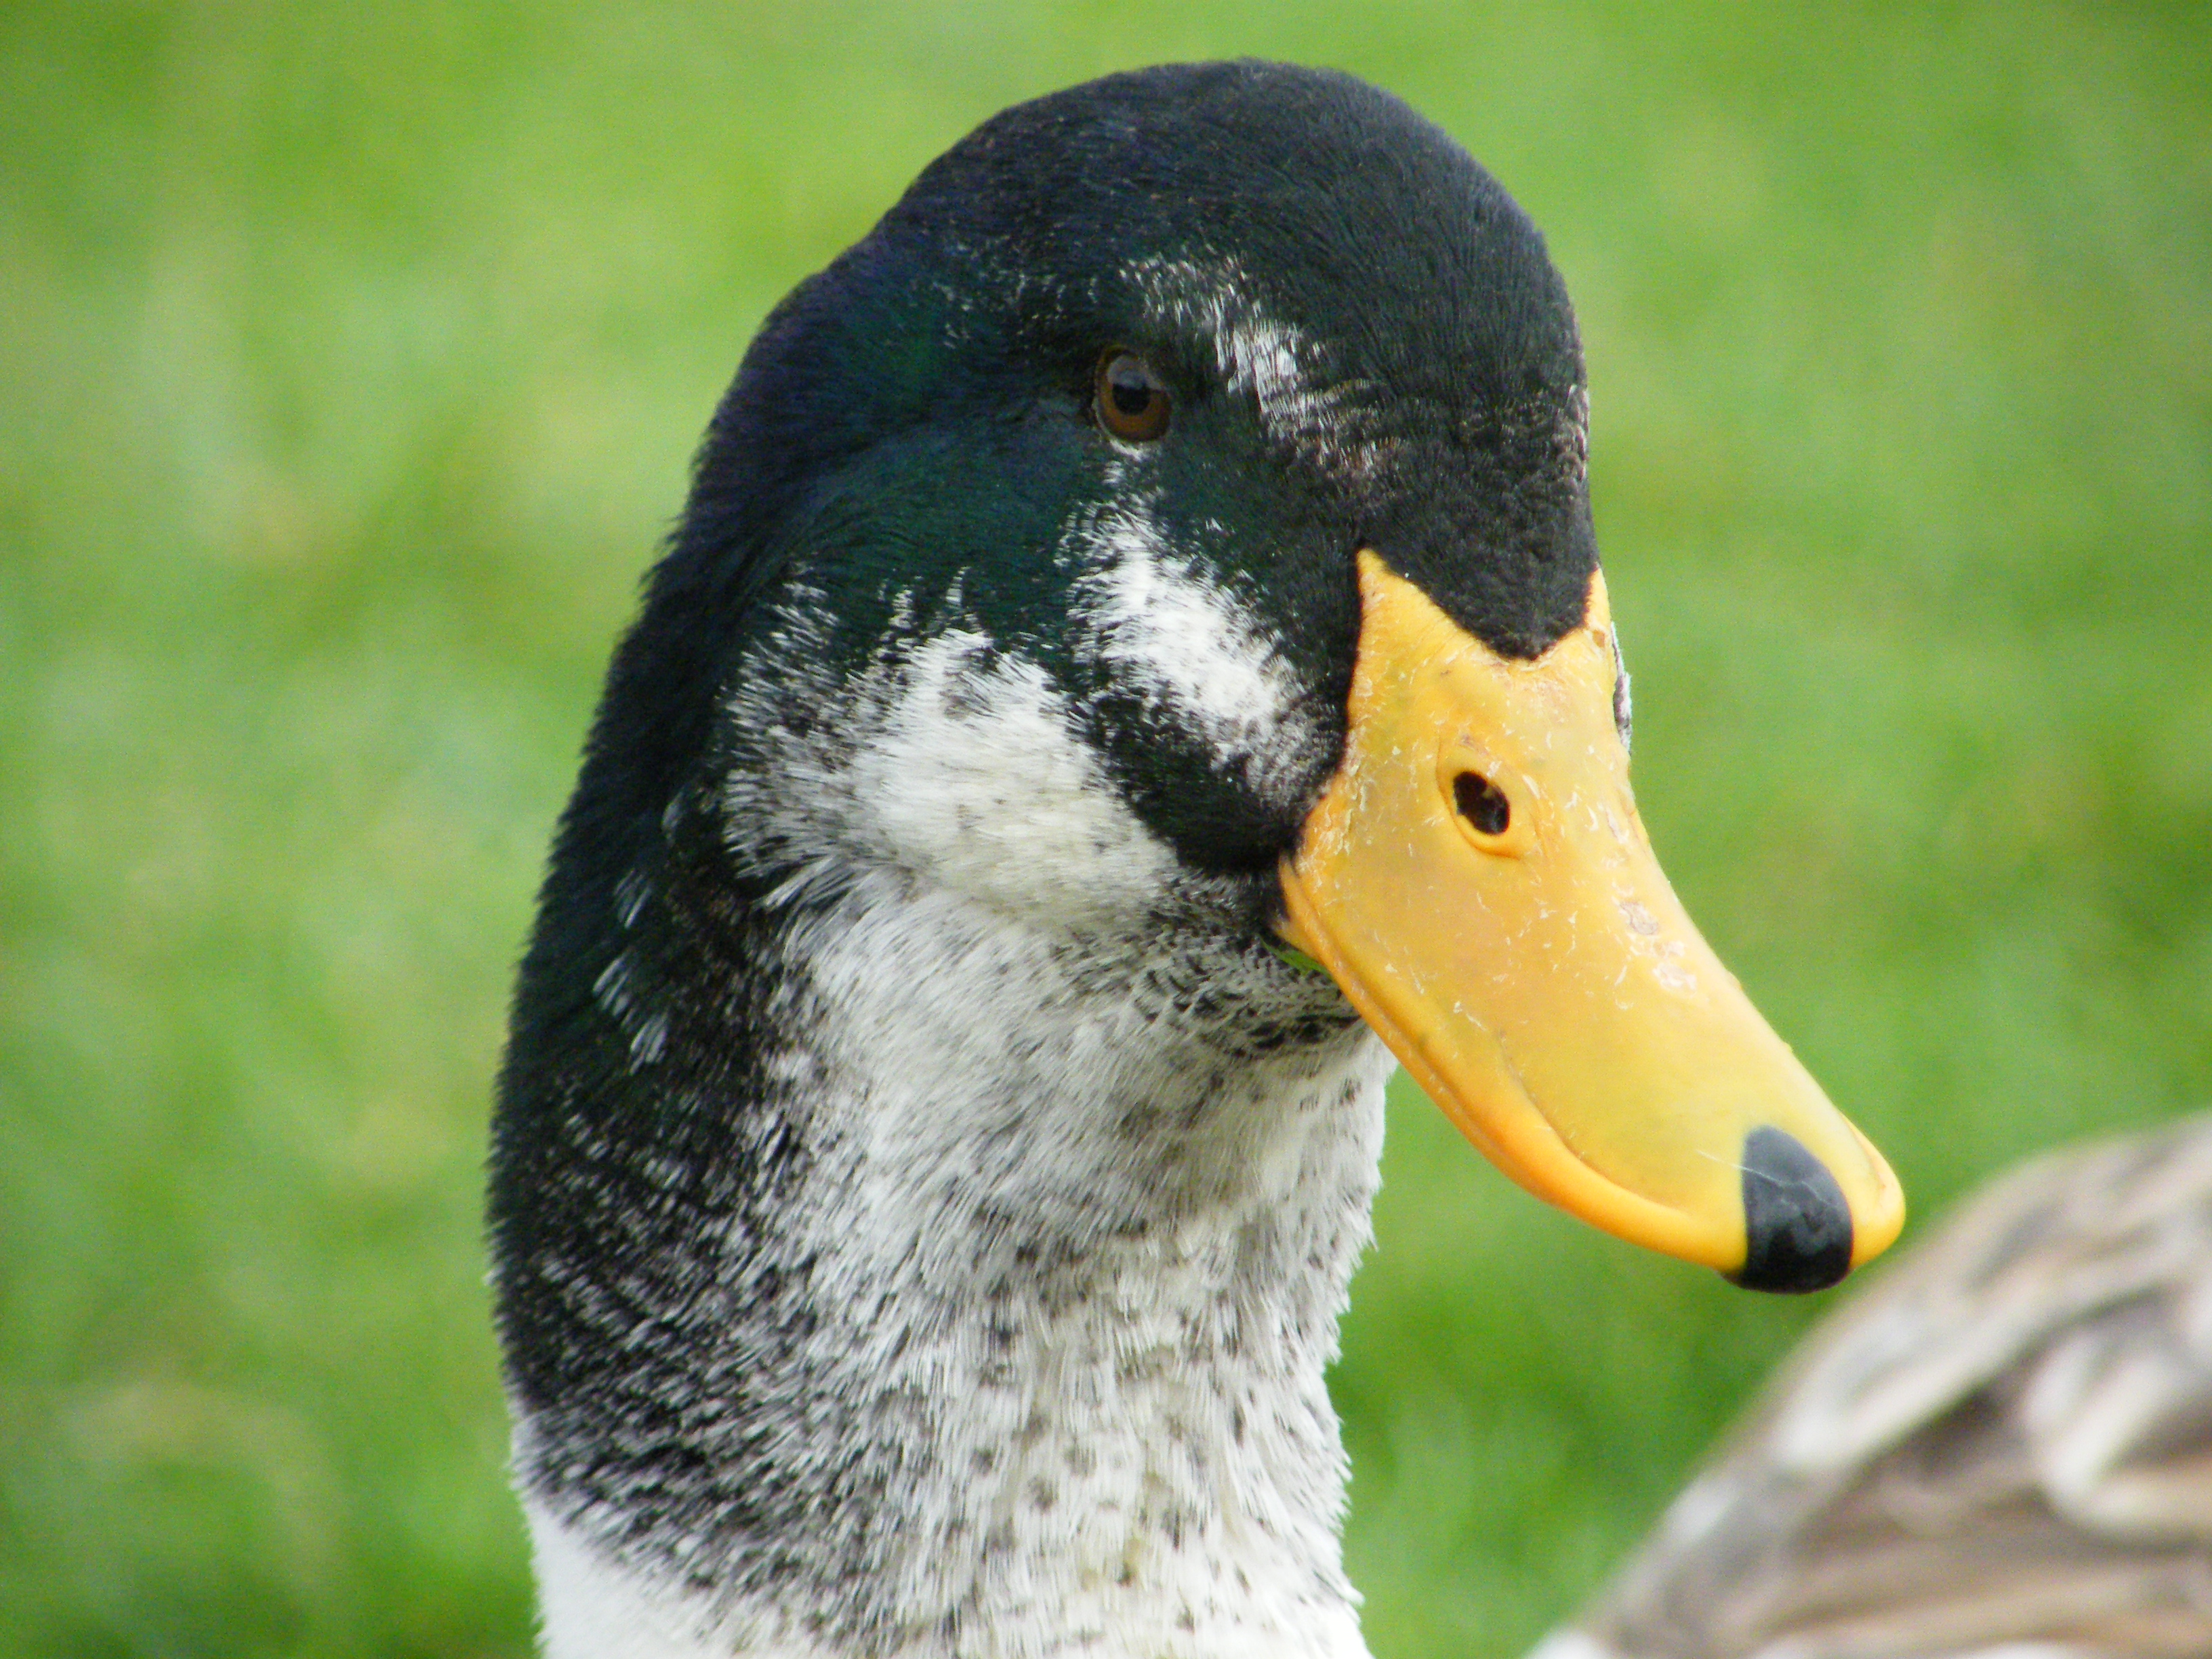 Restricted Mallard colouration, the "appleyard type" markings of the face define the breed.